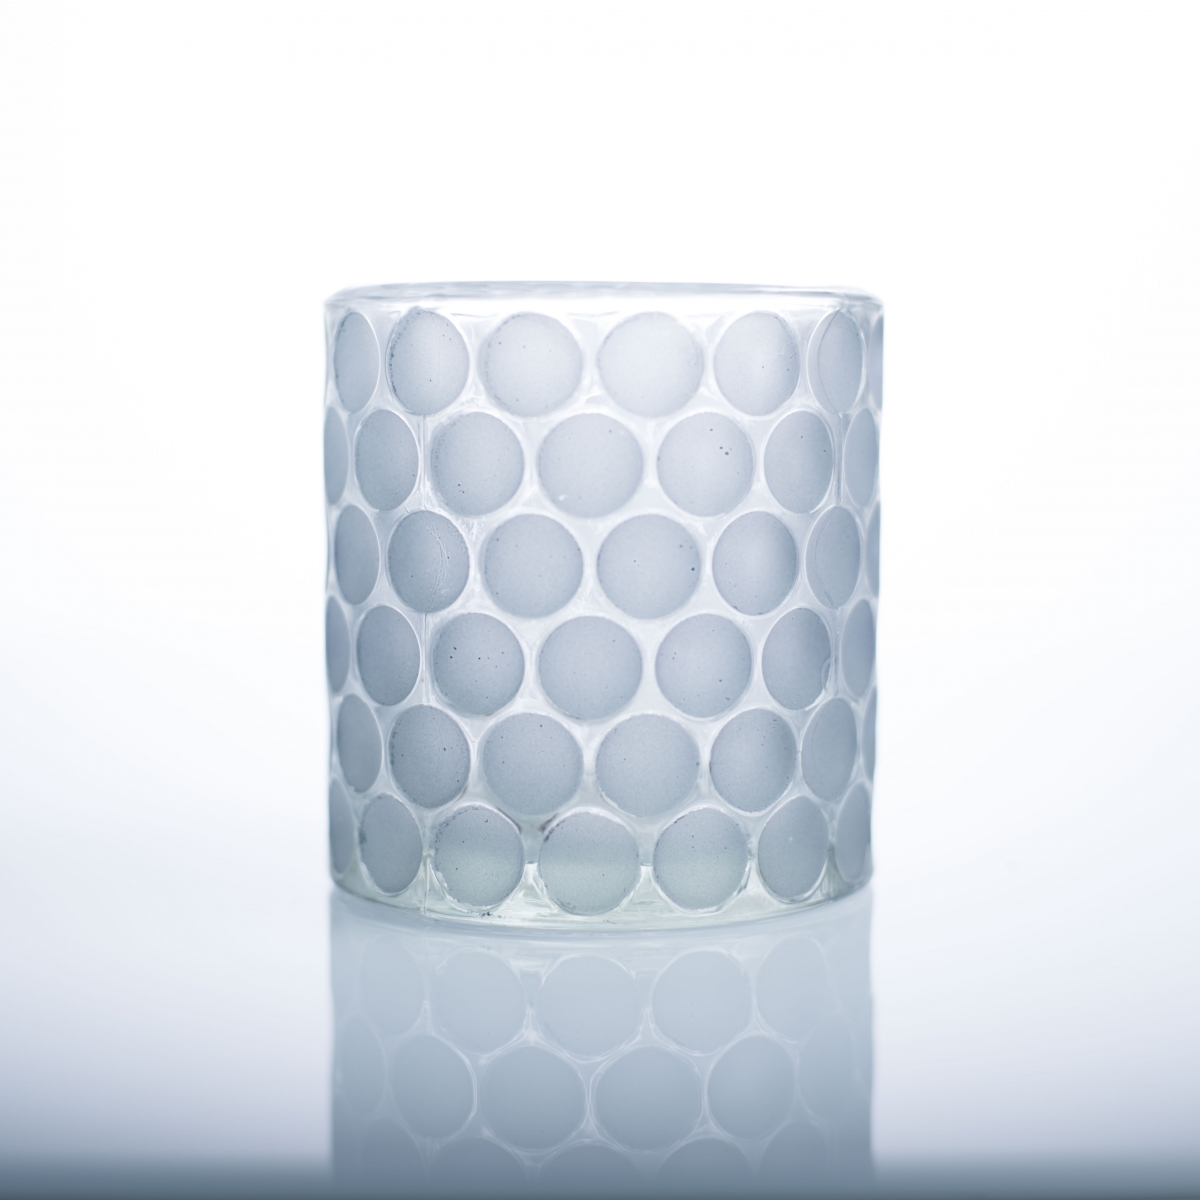 Candle Holder : Blue Glass Jar ,Polish ,Honeycomb Embossing ,Home Decoration ,China Factory ,Wholesale Price-HOWCANDLE-Candles,Scented Candles,Aromatherapy Candles,Soy Candles,Vegan Candles,Jar Candles,Pillar Candles,Candle Gift Sets,Essential Oils,Reed Diffuser,Candle Holder,